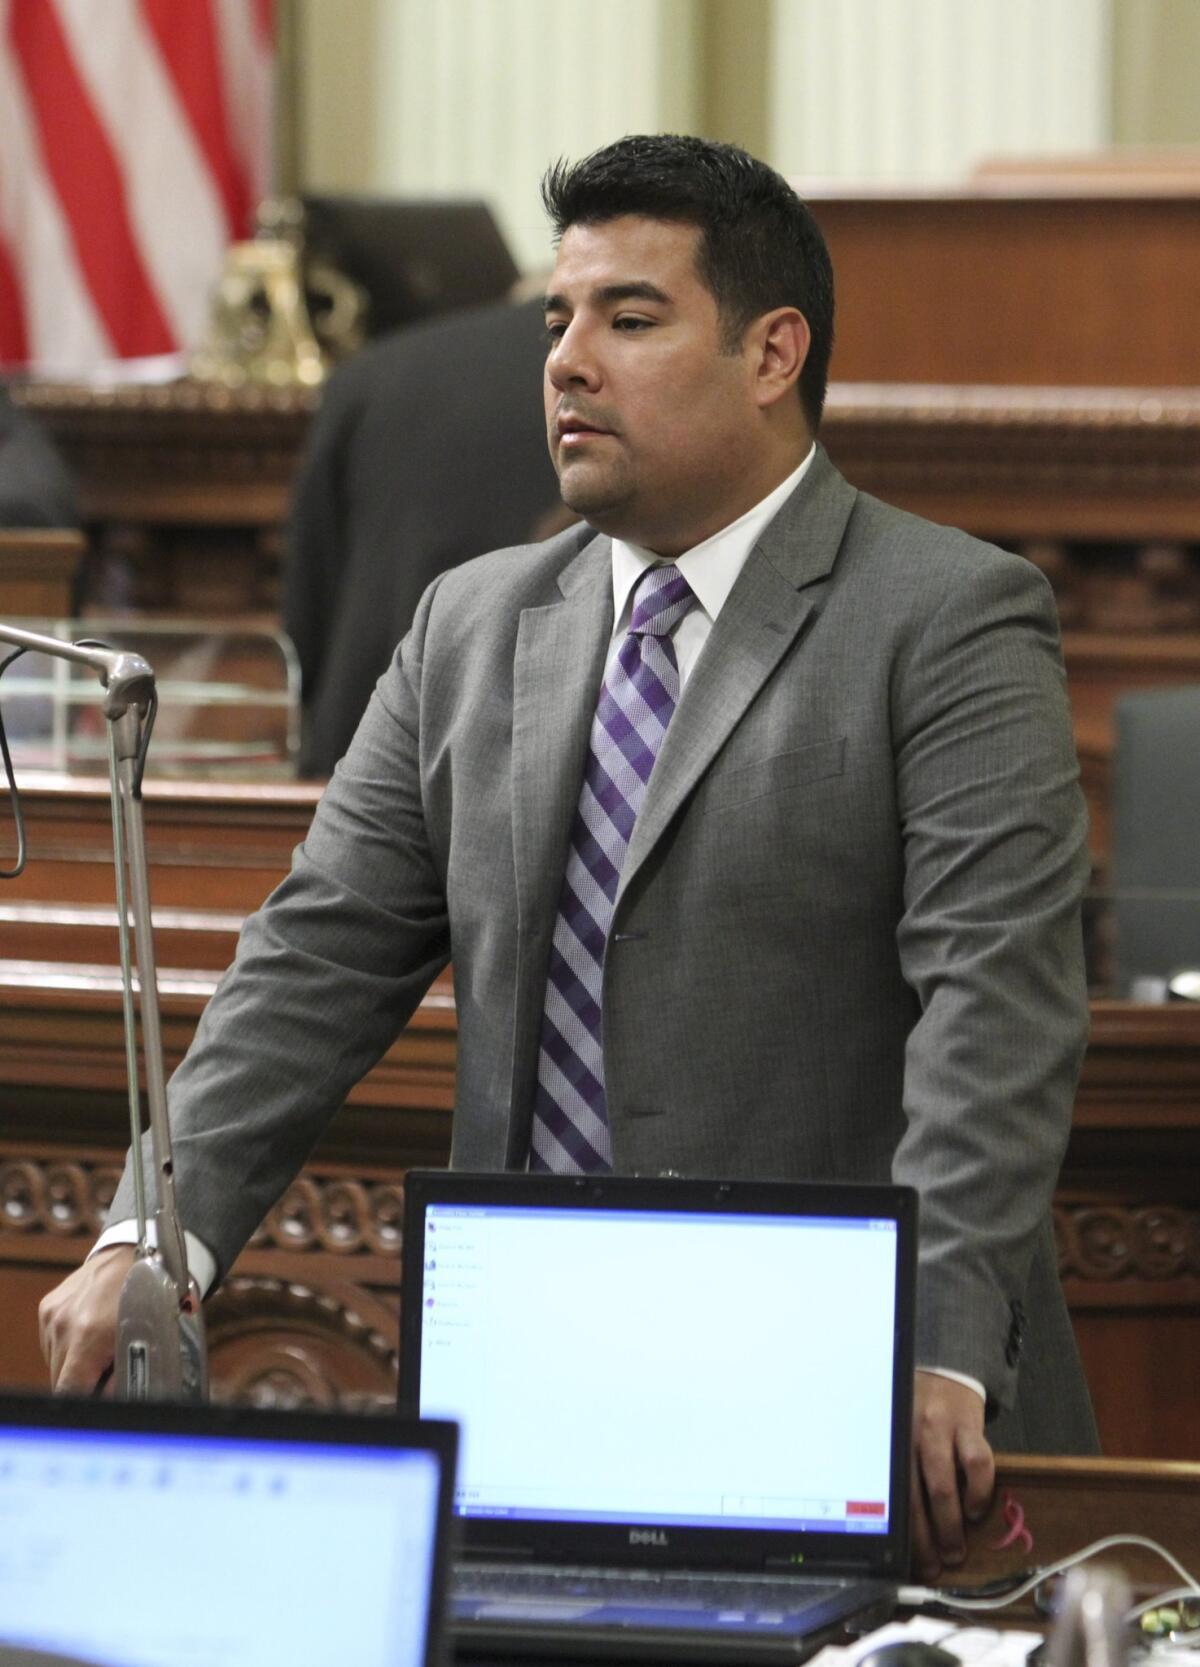 California Insurance Commissioner Ricardo Lara has been sued for actions he took that benefitted a campaign donor.